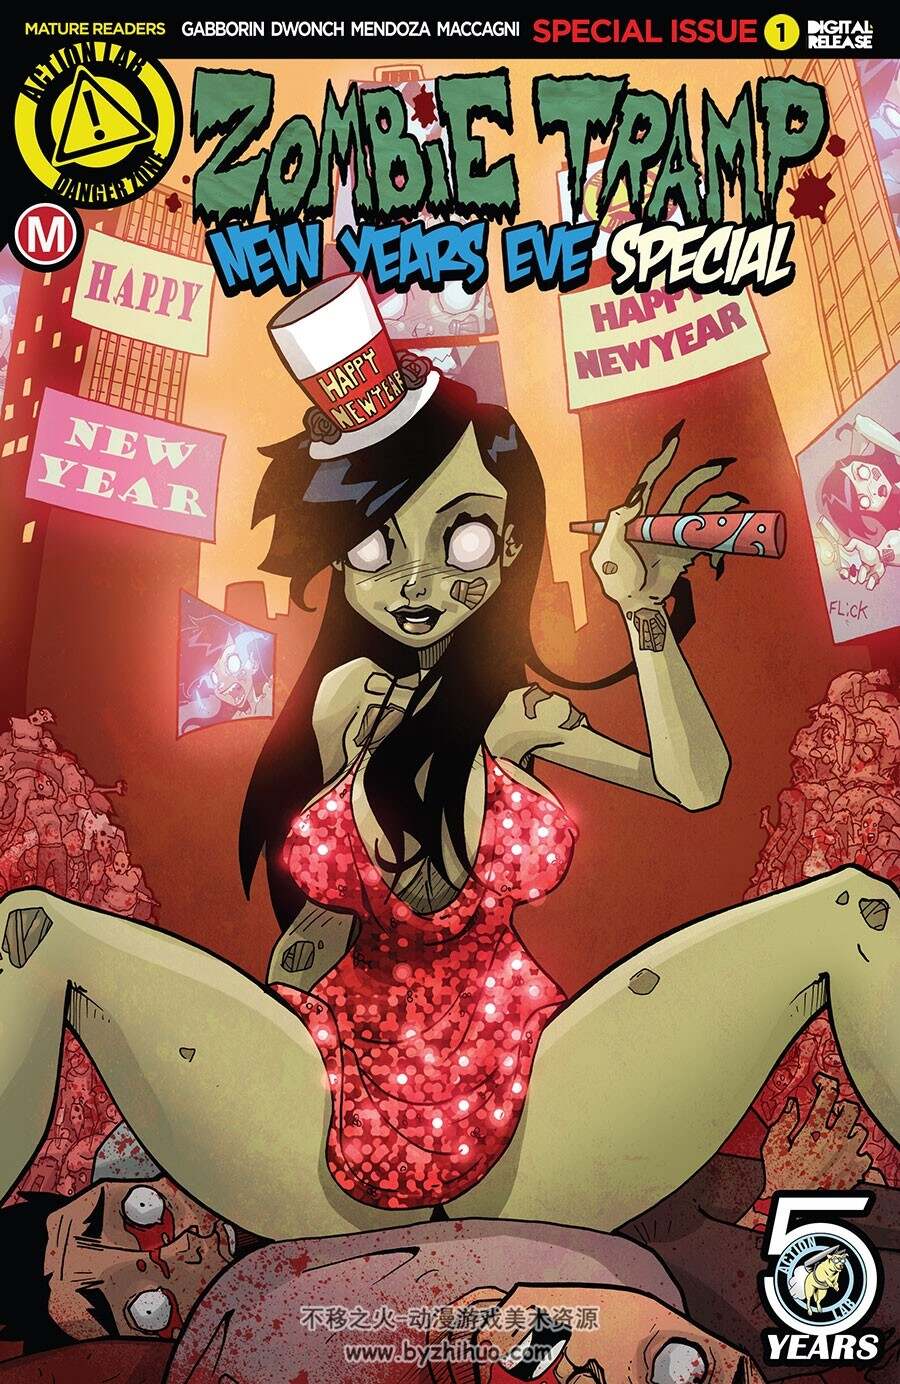 Zombie Tramp New Years Eve Special 全一册 Dave Dwonch - Shawn Gabborin - Dan Mendoz